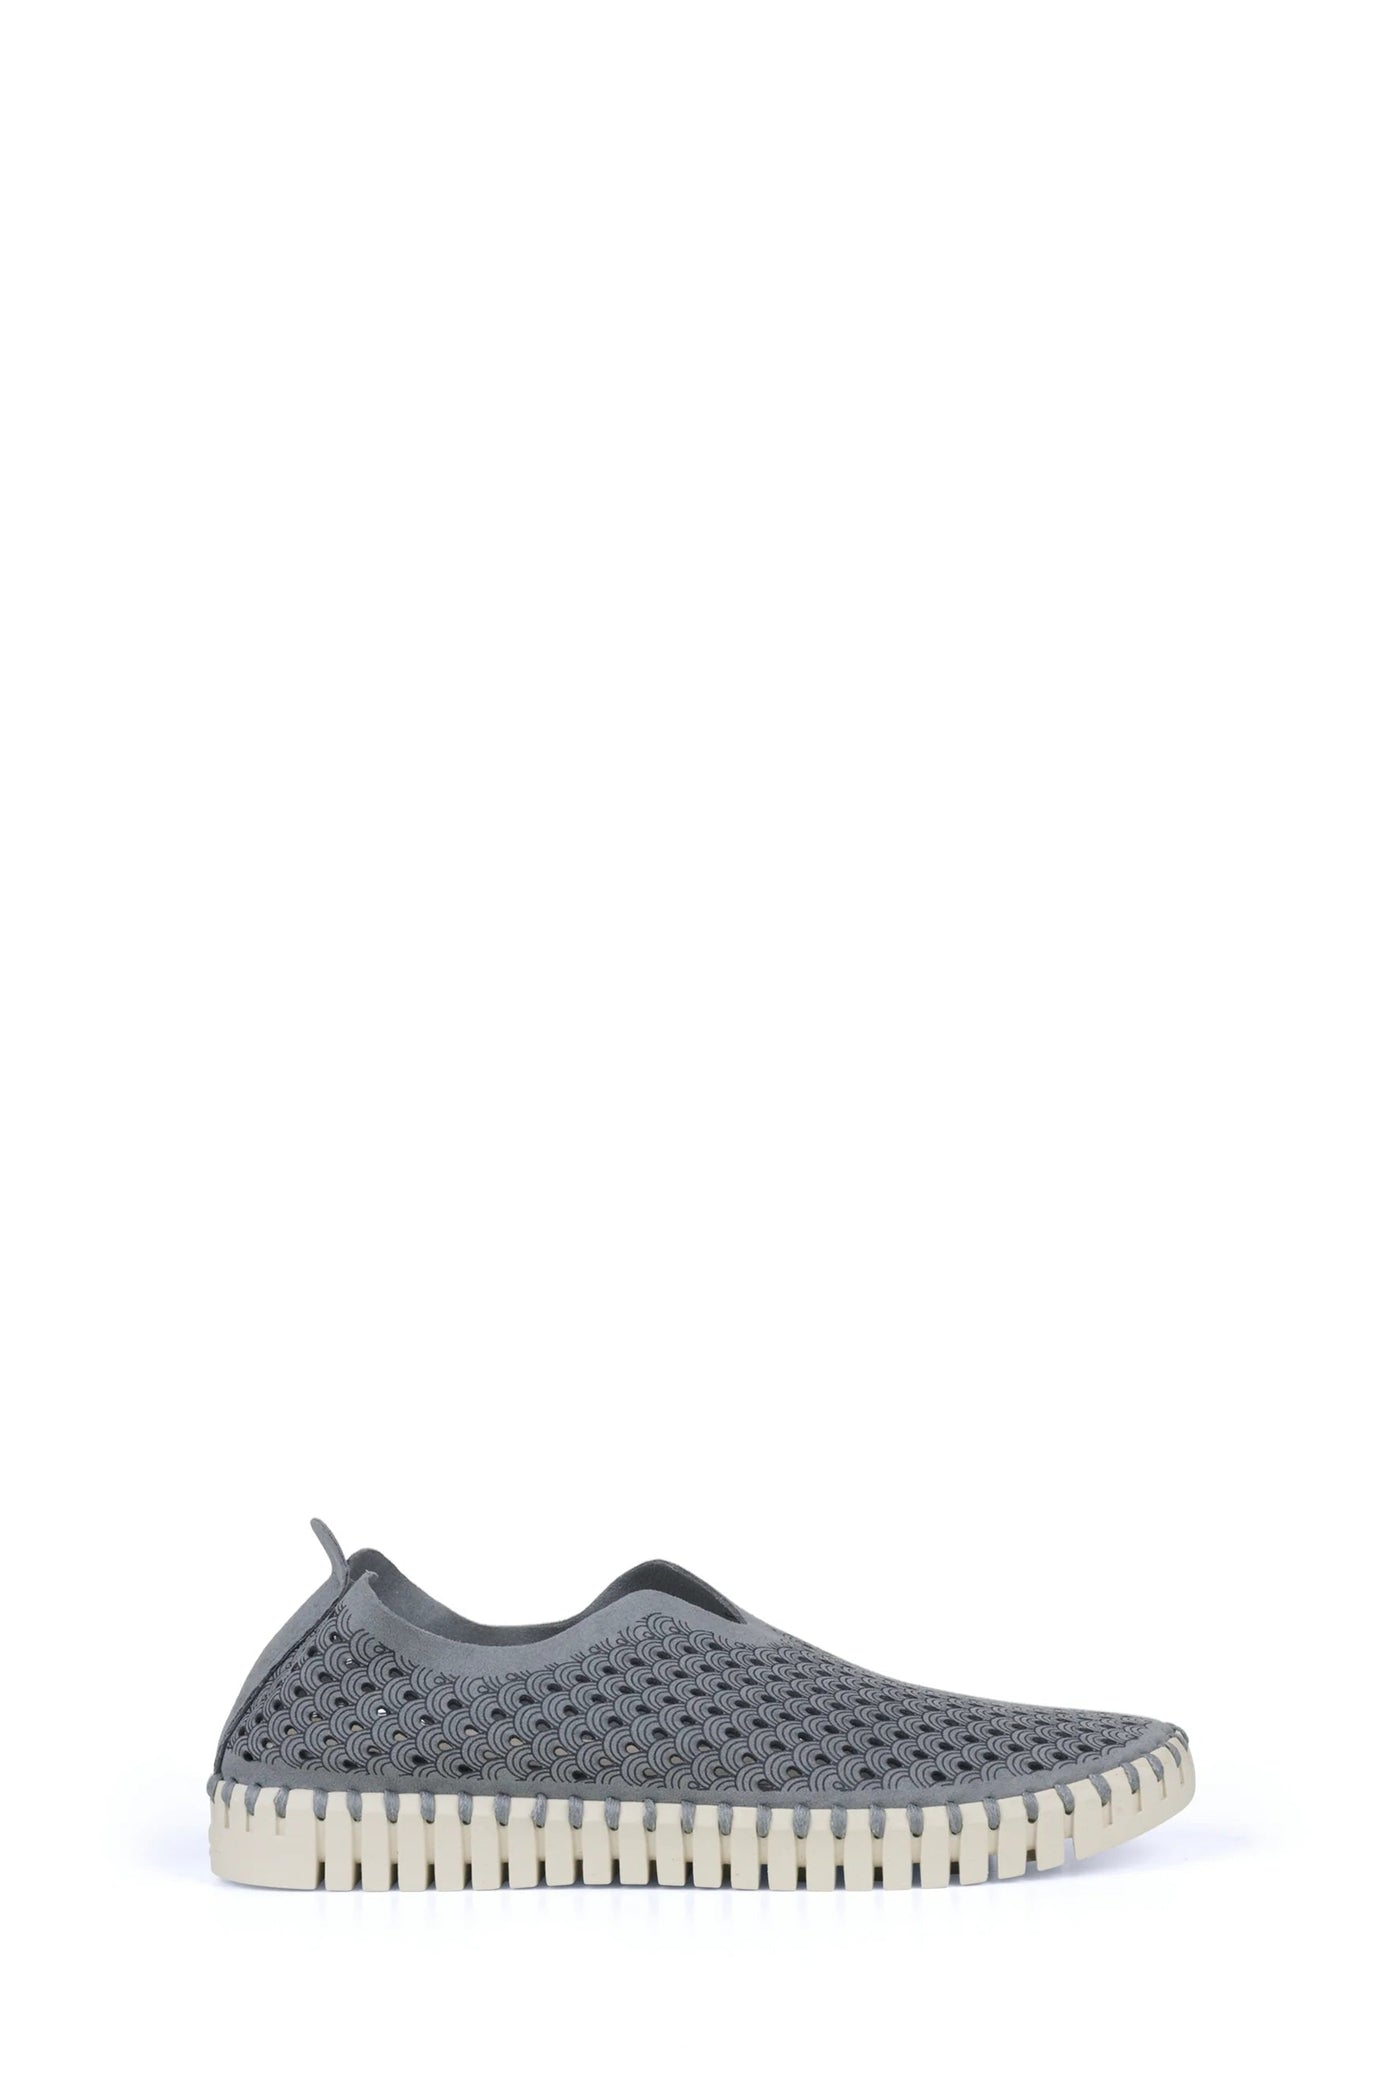 Ilse Jacobsen Tulip Shoes Grey-Accessories-Ohh! By Gum - Shop Sustainable